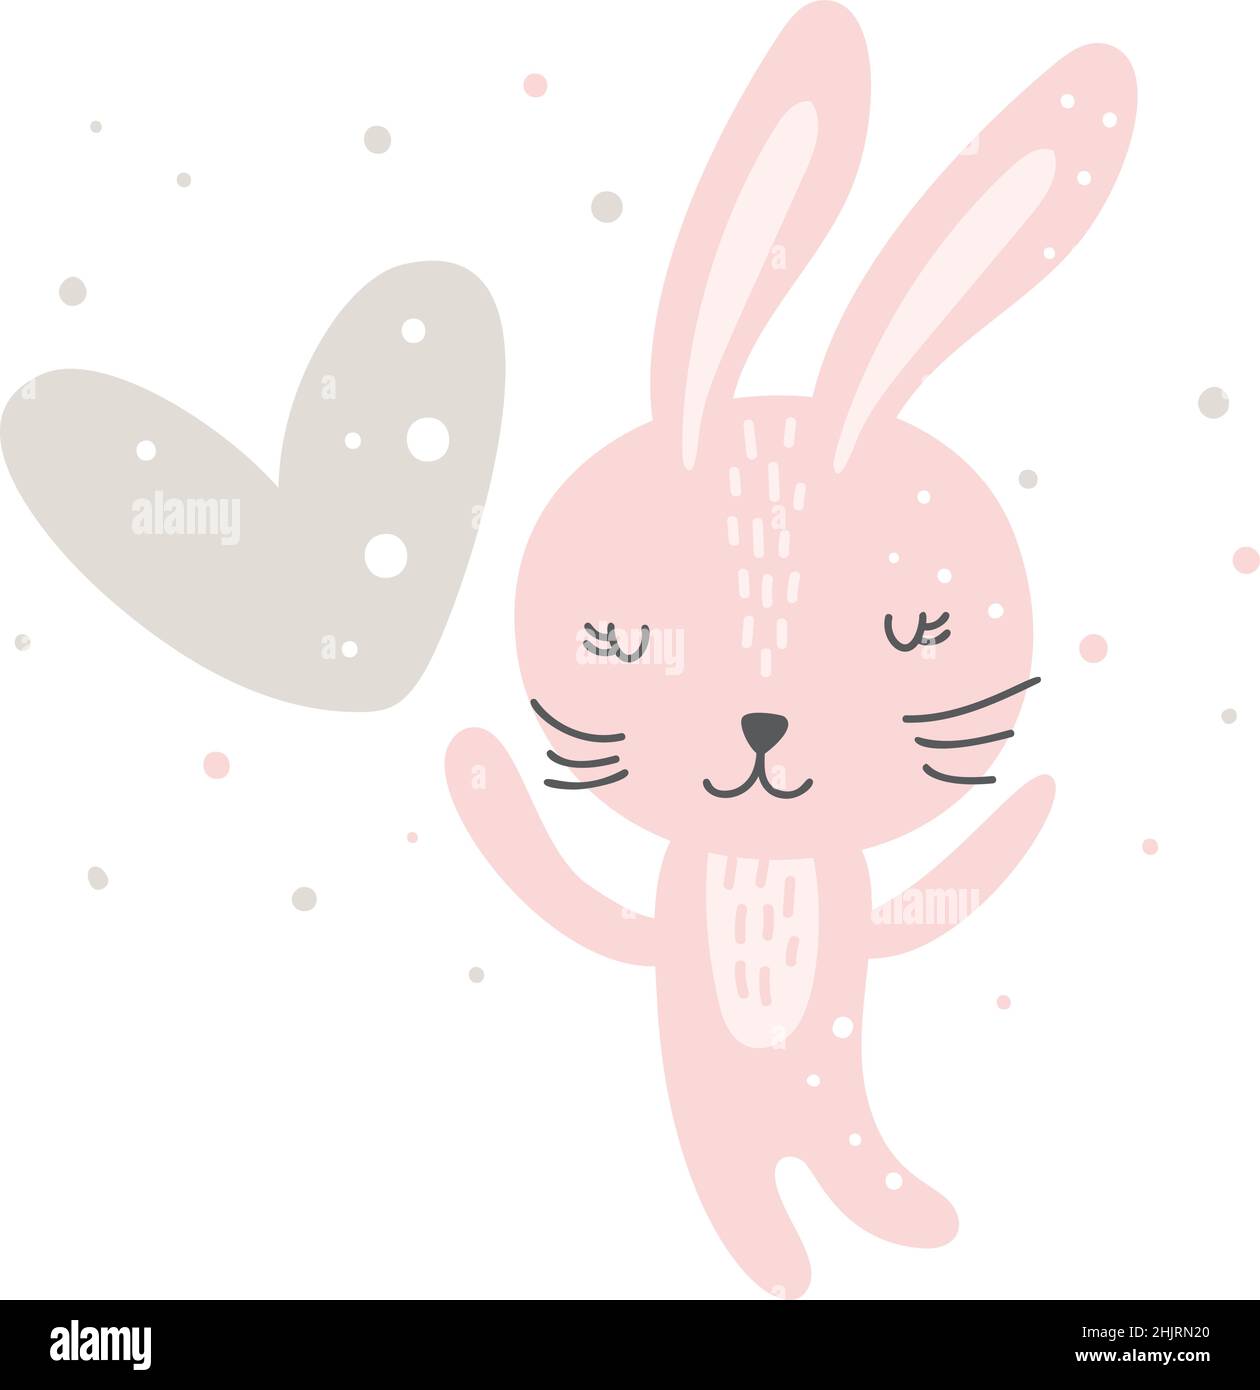 Cute valentine doodle hand drawn pink bunny girl with heart illustration. Sweet rabbit character holding a heart. Cartoon character baby vector logo Stock Vector